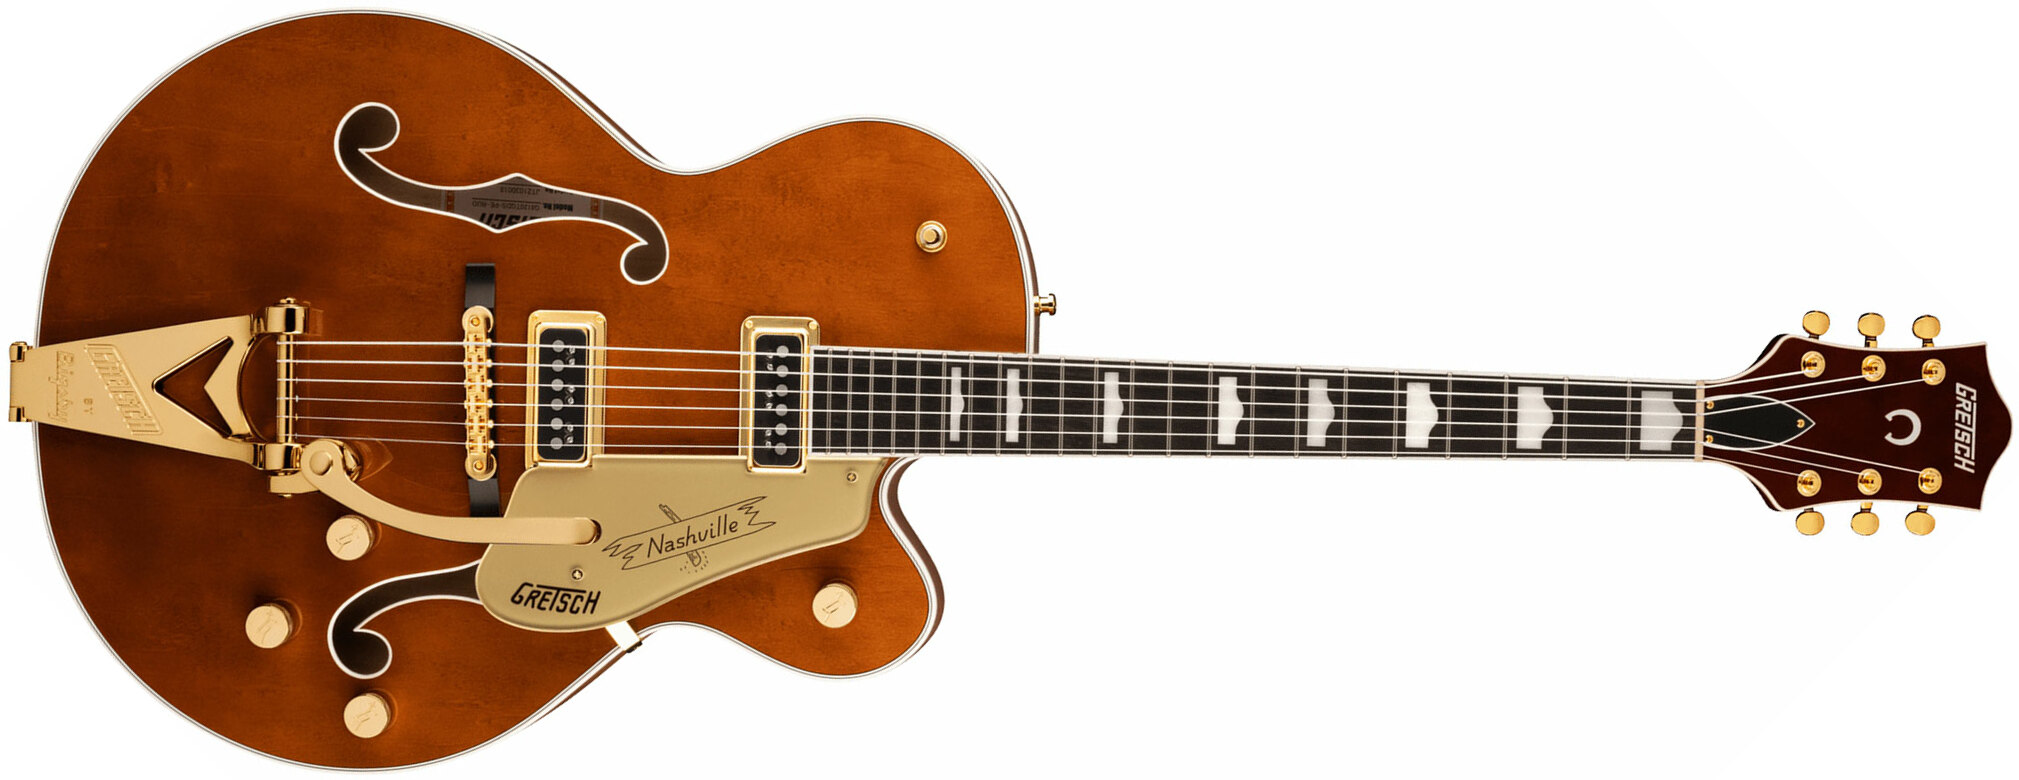 Gretsch G6120tg-ds Players Edition Nashville Pro Jap Bigsby Eb - Roundup Orange - Semi-hollow electric guitar - Main picture